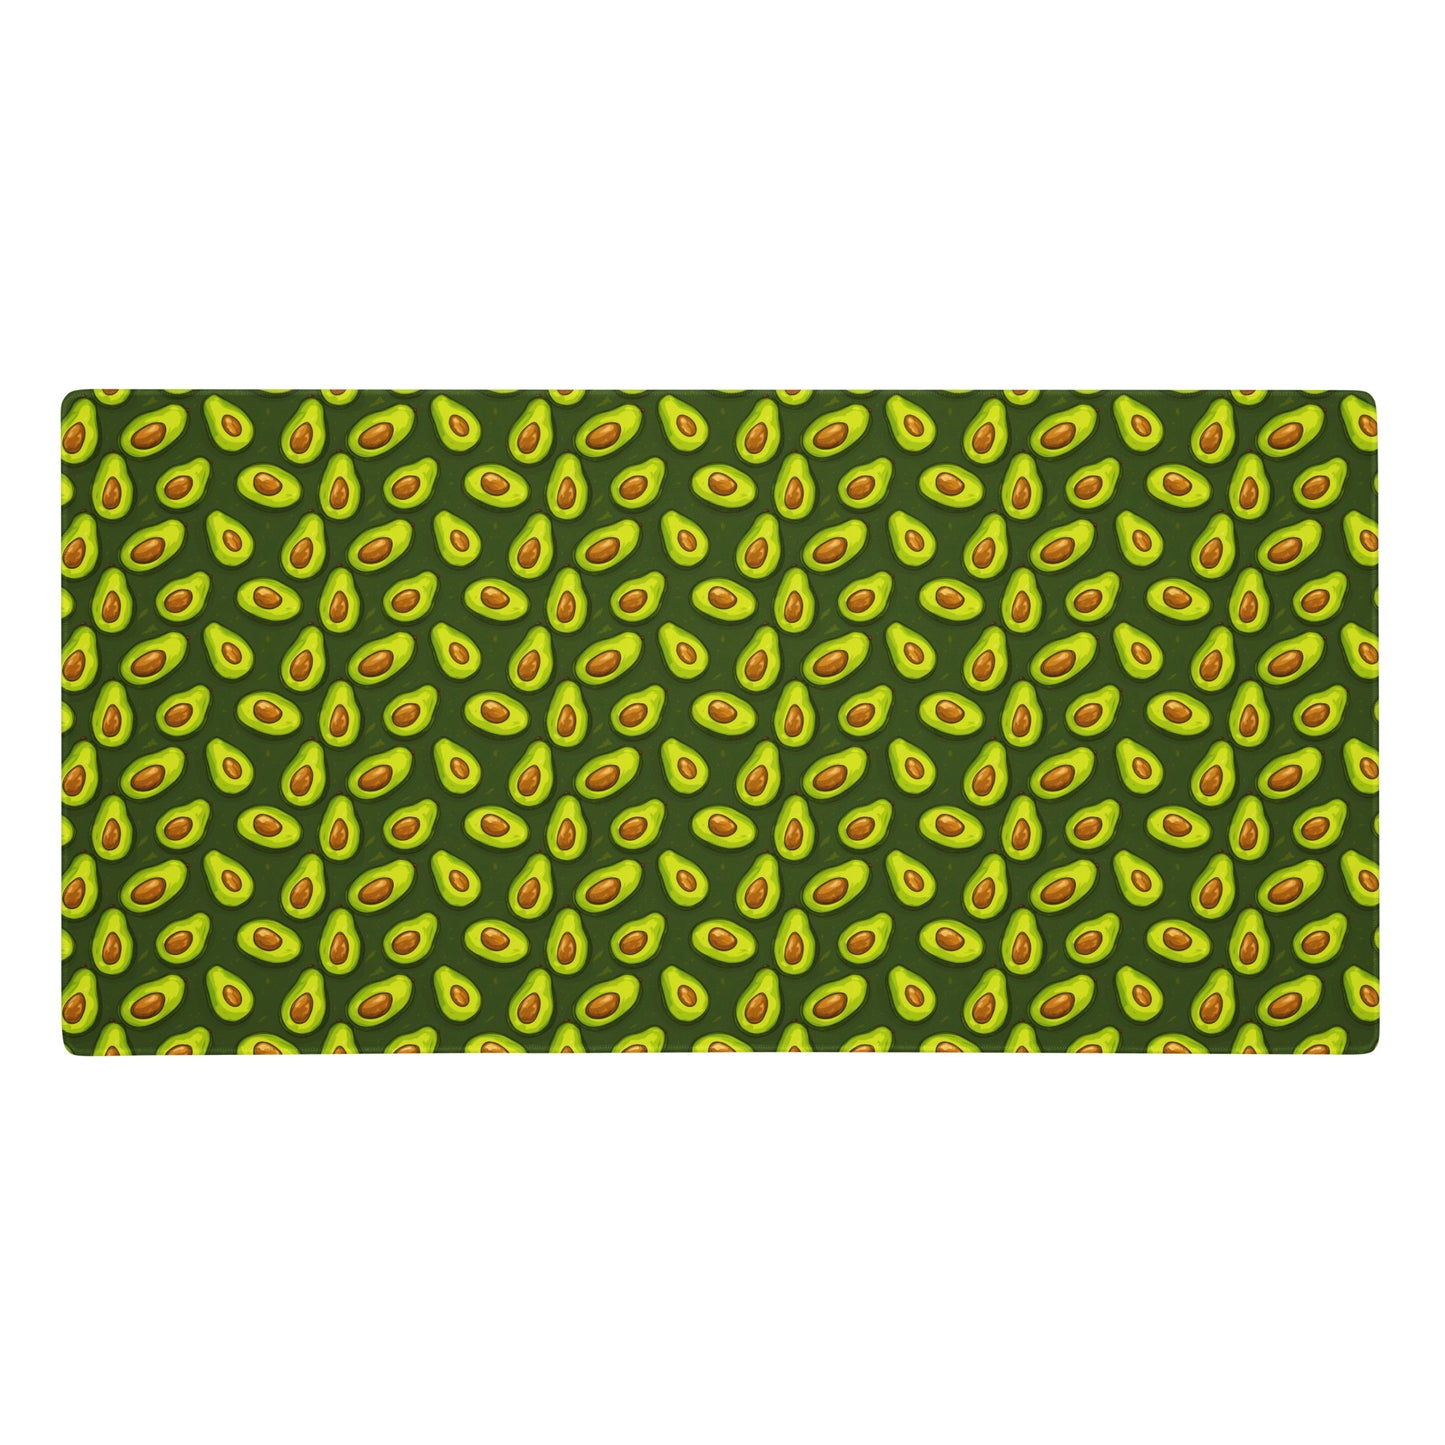 A 36" x 18" desk pad with lots of avocados on it. Green in color.